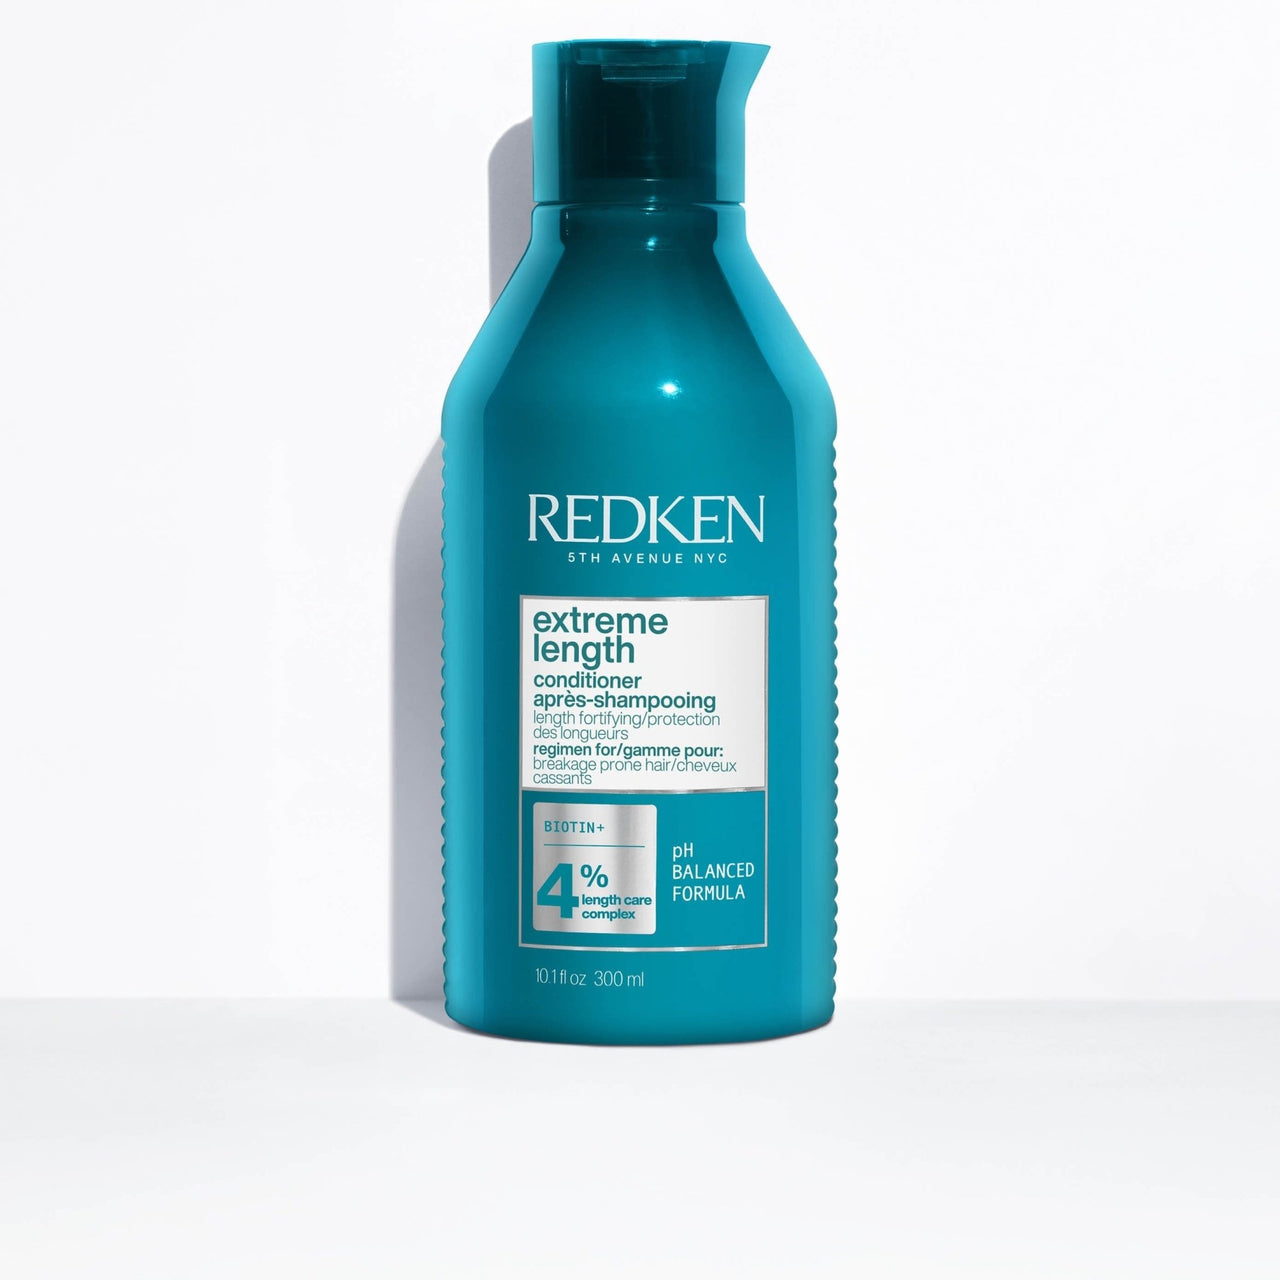 REDKEN_Redken Extreme Length Conditioner_Cosmetic World